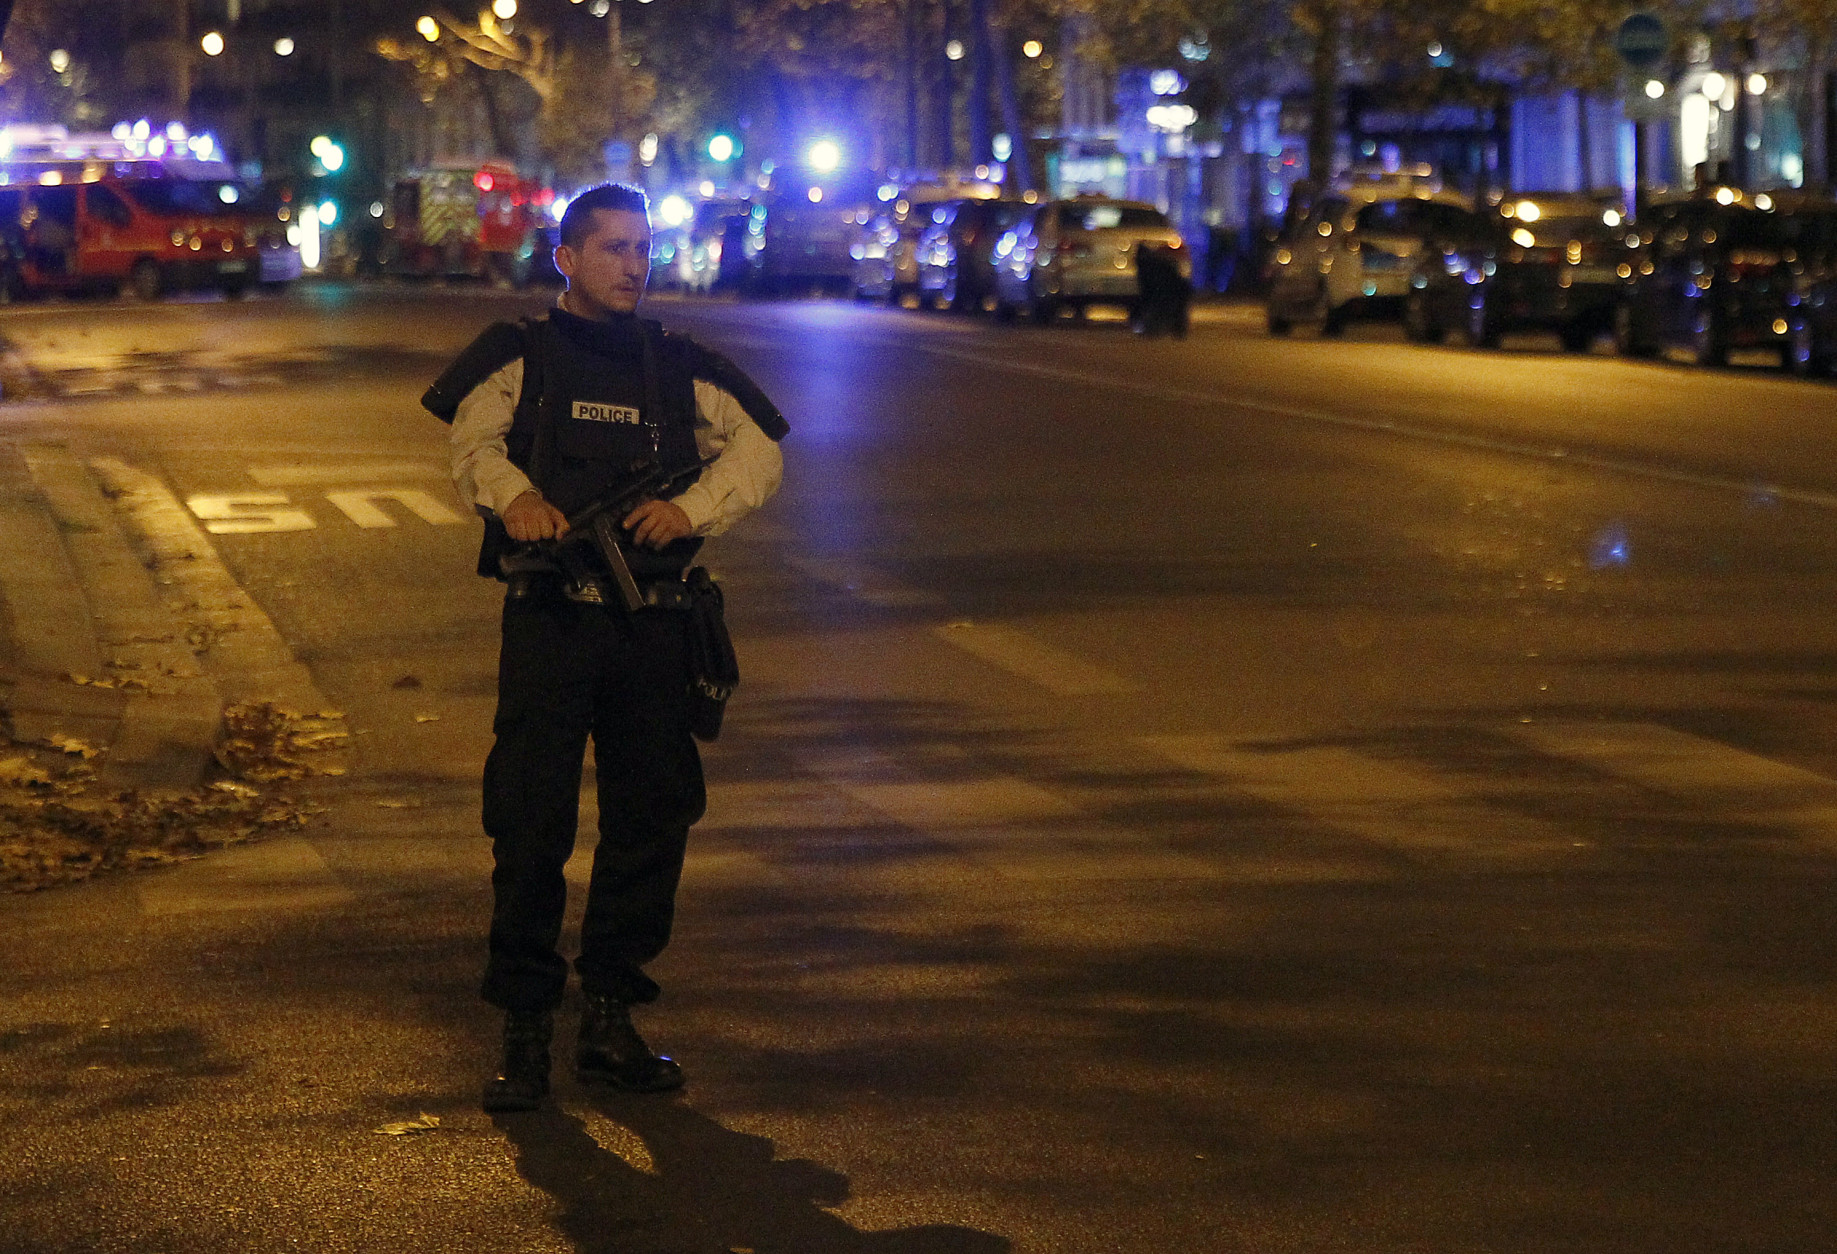 PARIS, FRANCE - NOVEMBER 13:  Police survey the area of Boulevard Baumarchais after an attack in the French capital on November 13, 2015 in Paris, France. At least 18 people were killed in a series of gun attacks across Paris, as well as explosions outside the national stadium where France was hosting Germany.  (Photo by Thierry Chesnot/Getty Images)